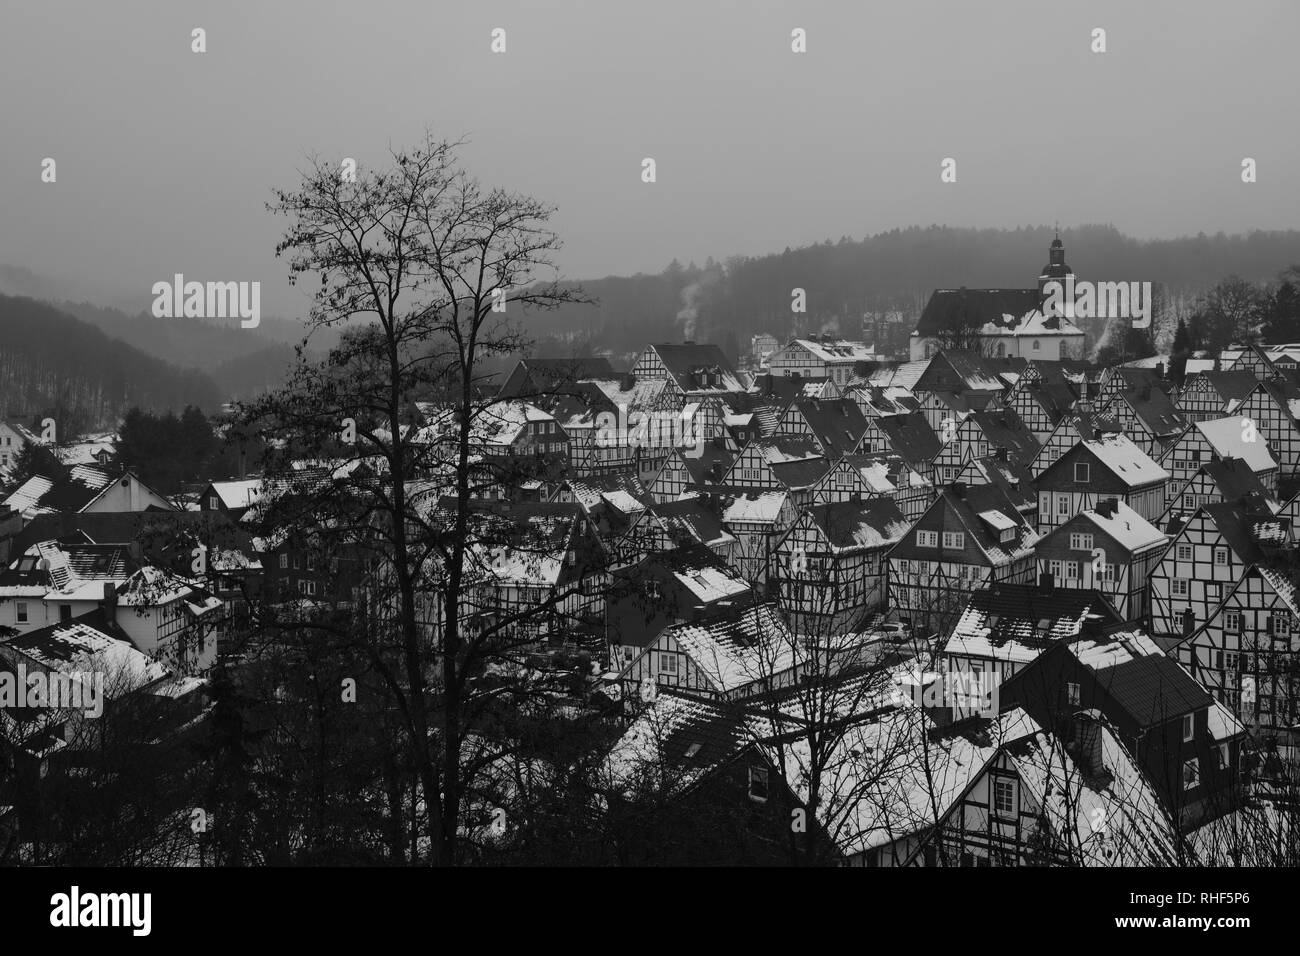 Germany Old Town of Freudenberg Nearby Cologne and Siegen Stock Photo